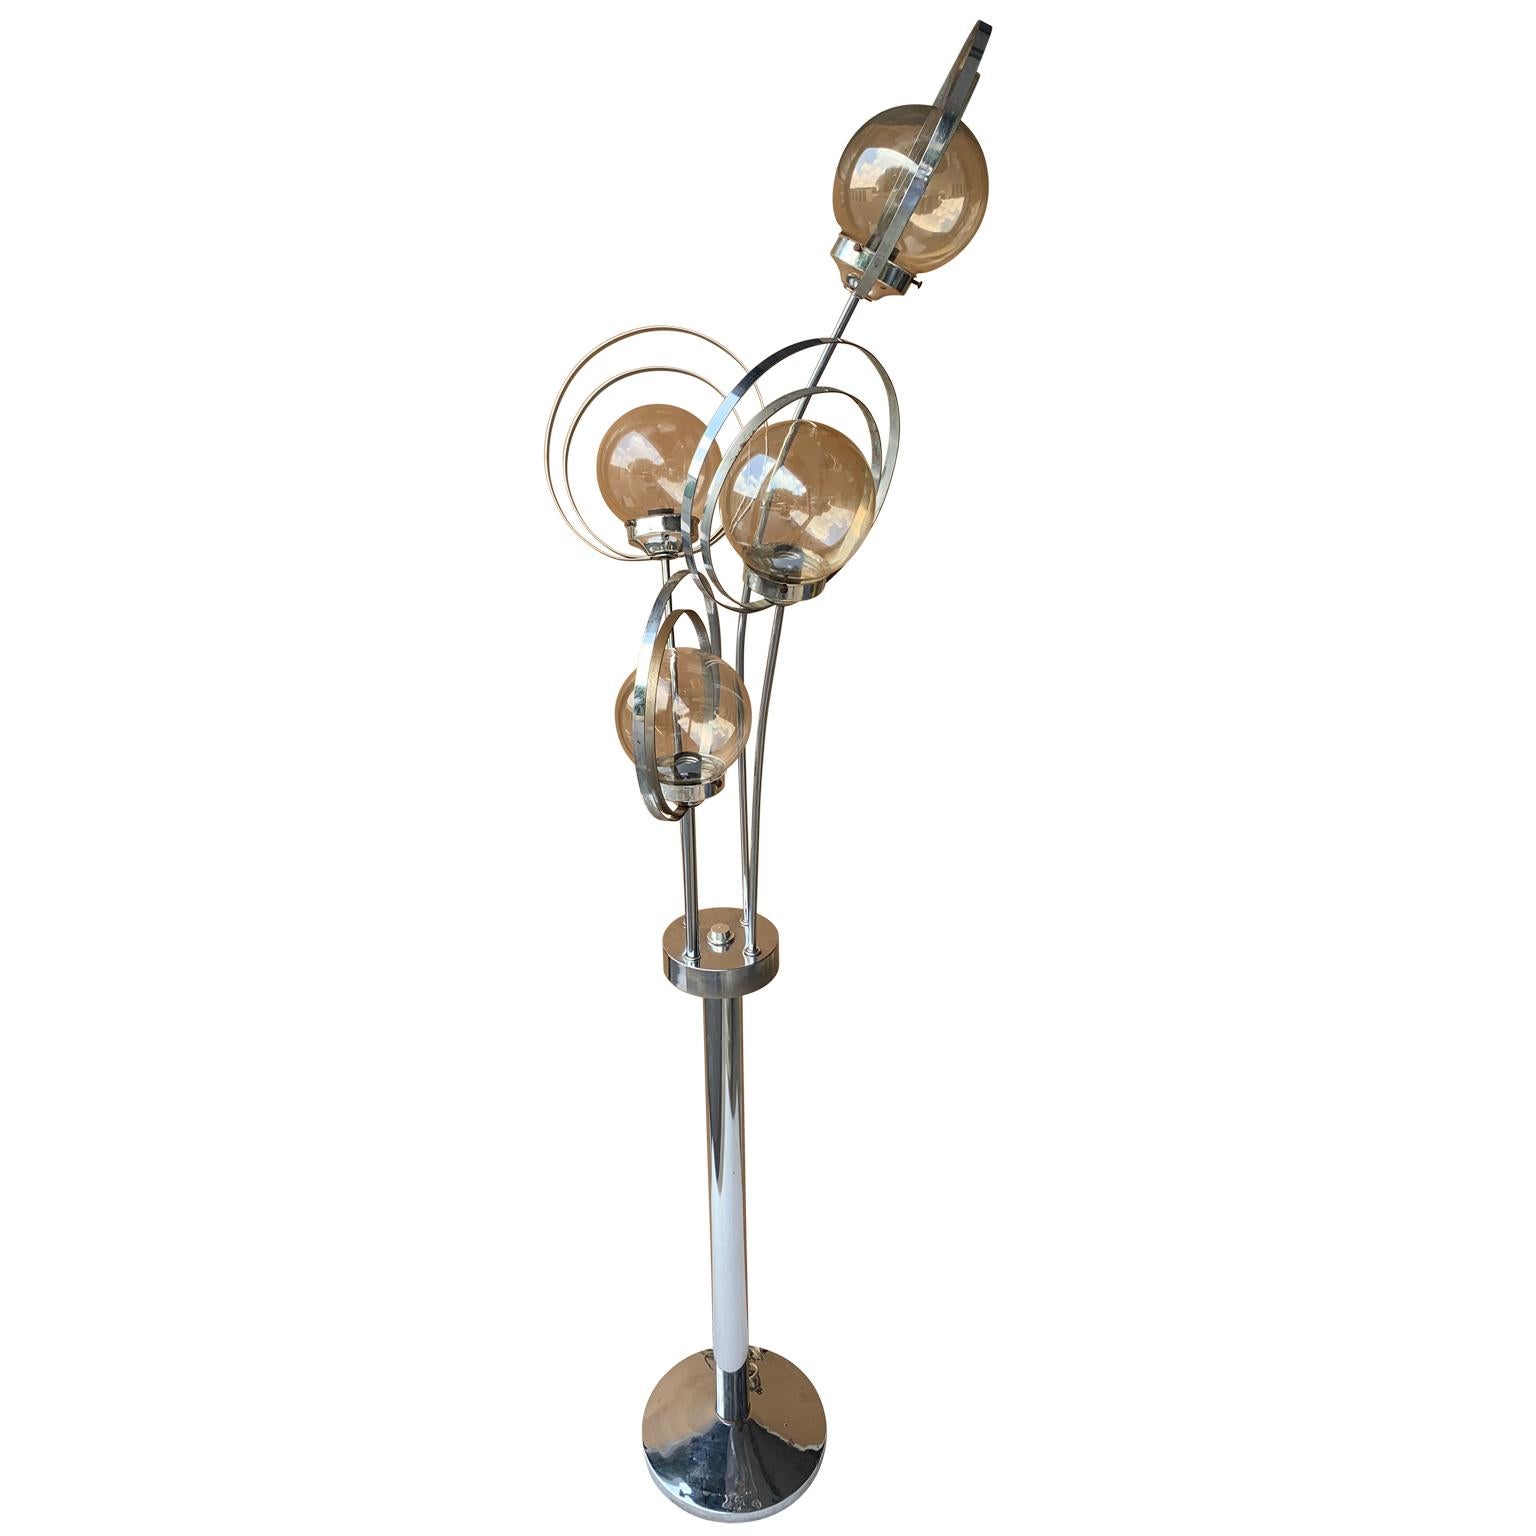 Mid-Century Modern chrome sputnik floor lamp

Floor lamp has lightly smoked glass globes

Lamp is newly re-wired.
 